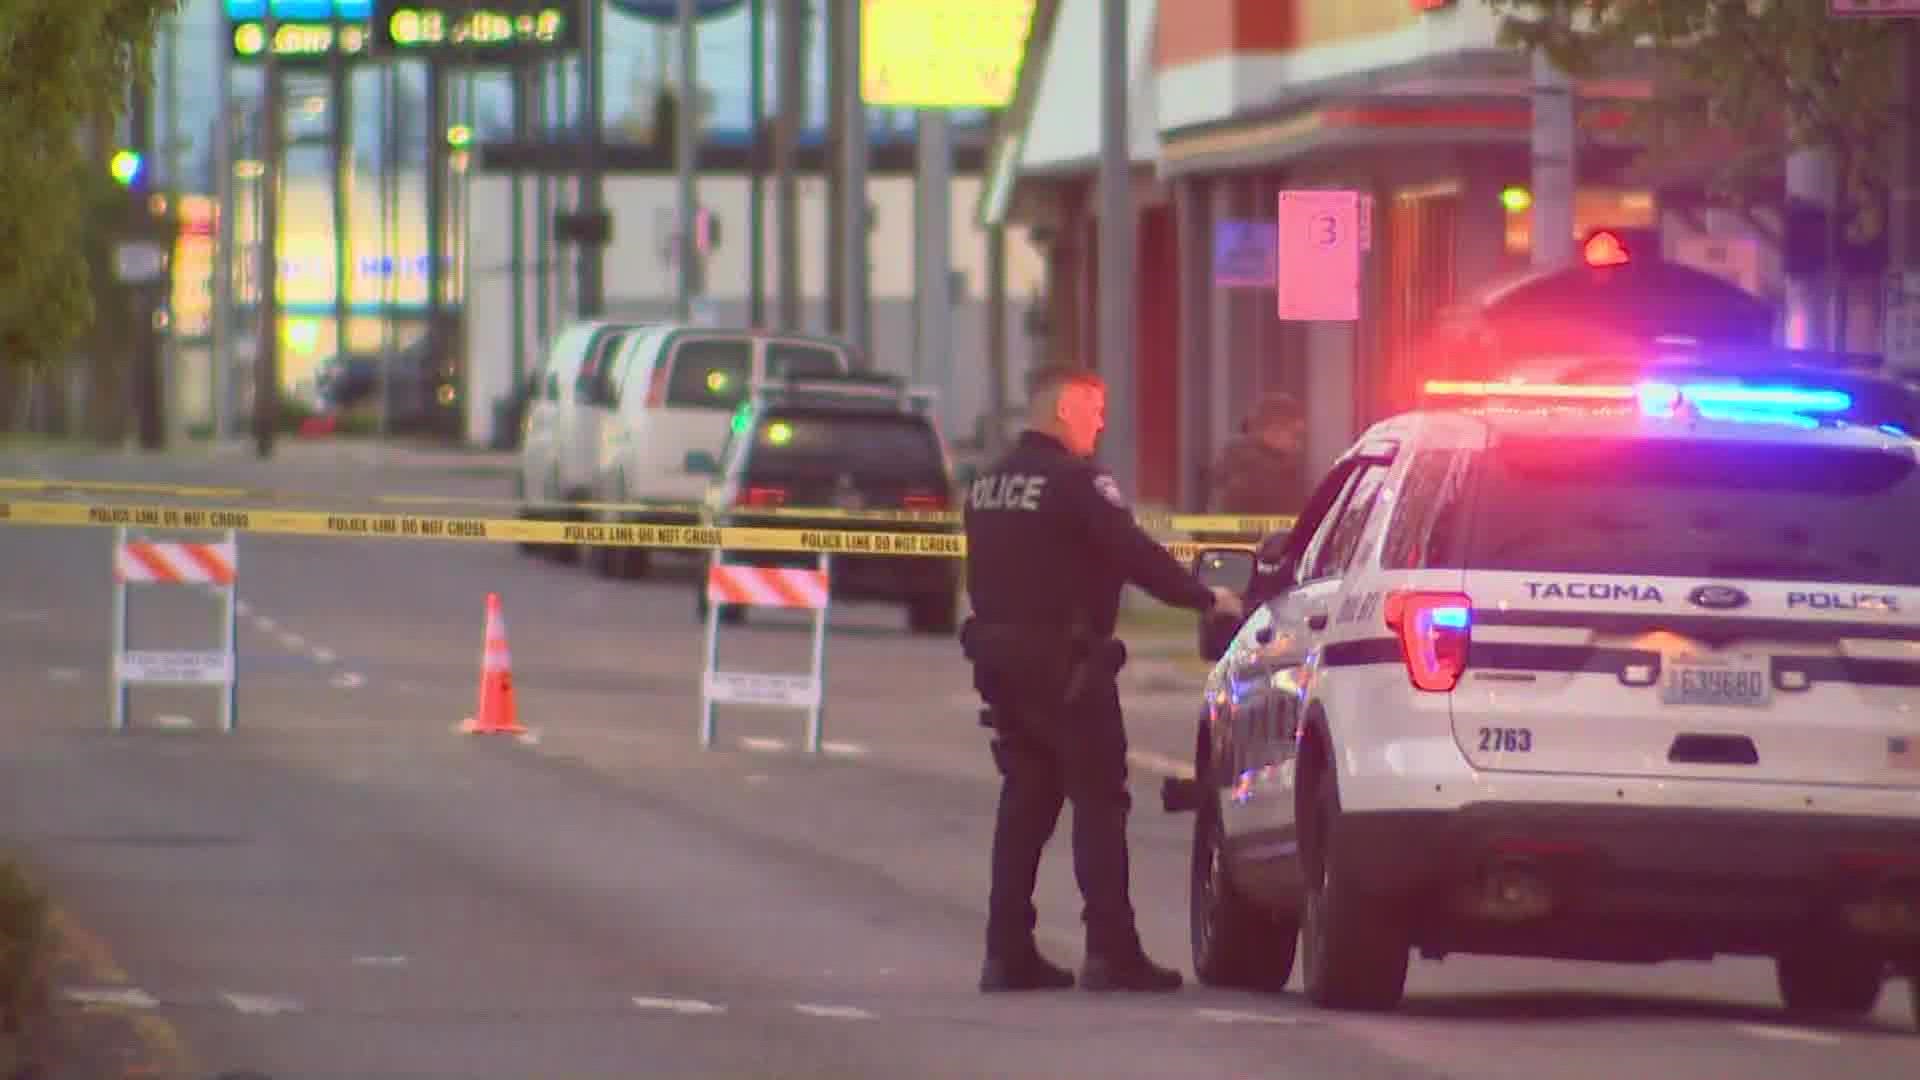 Tacoma police are investigating two separate shootings that left two people dead.